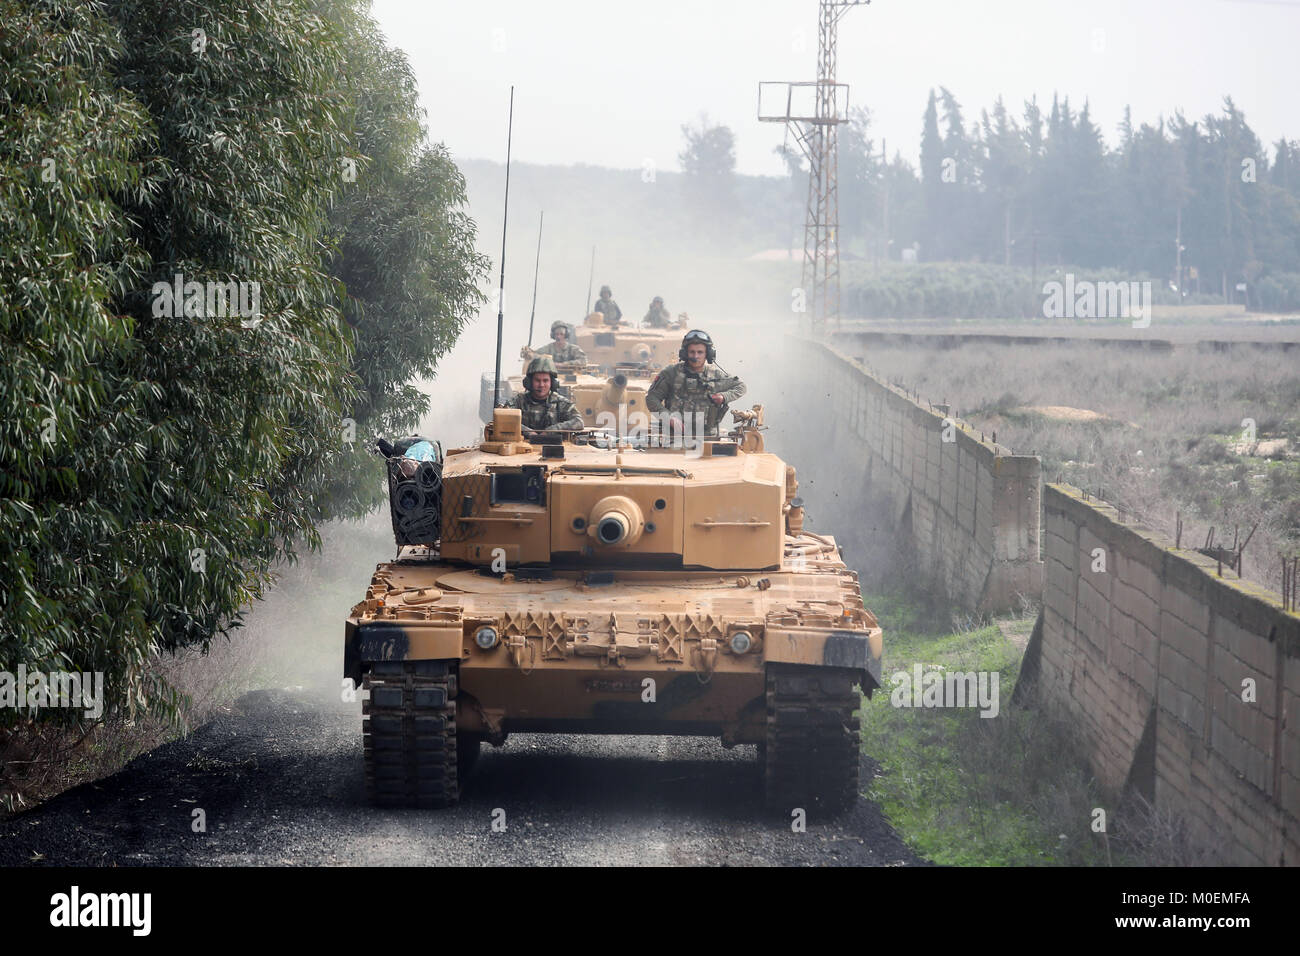 (180121) -- HATAY (TURKEY), Jan. 21, 2018 (Xinhua) -- Turkish armored vehicles head toward Syria's Afrin district from Hatay, Turkey, on Jan. 21, 2018. Turkish ground troops entered Syria's Afrin Sunday on the second day of an offensive against U.S-backed Kurdish militia which should be wrapped up soon, said Turkish President Recep Tayyip Erdogan. (Xinhua) Stock Photo